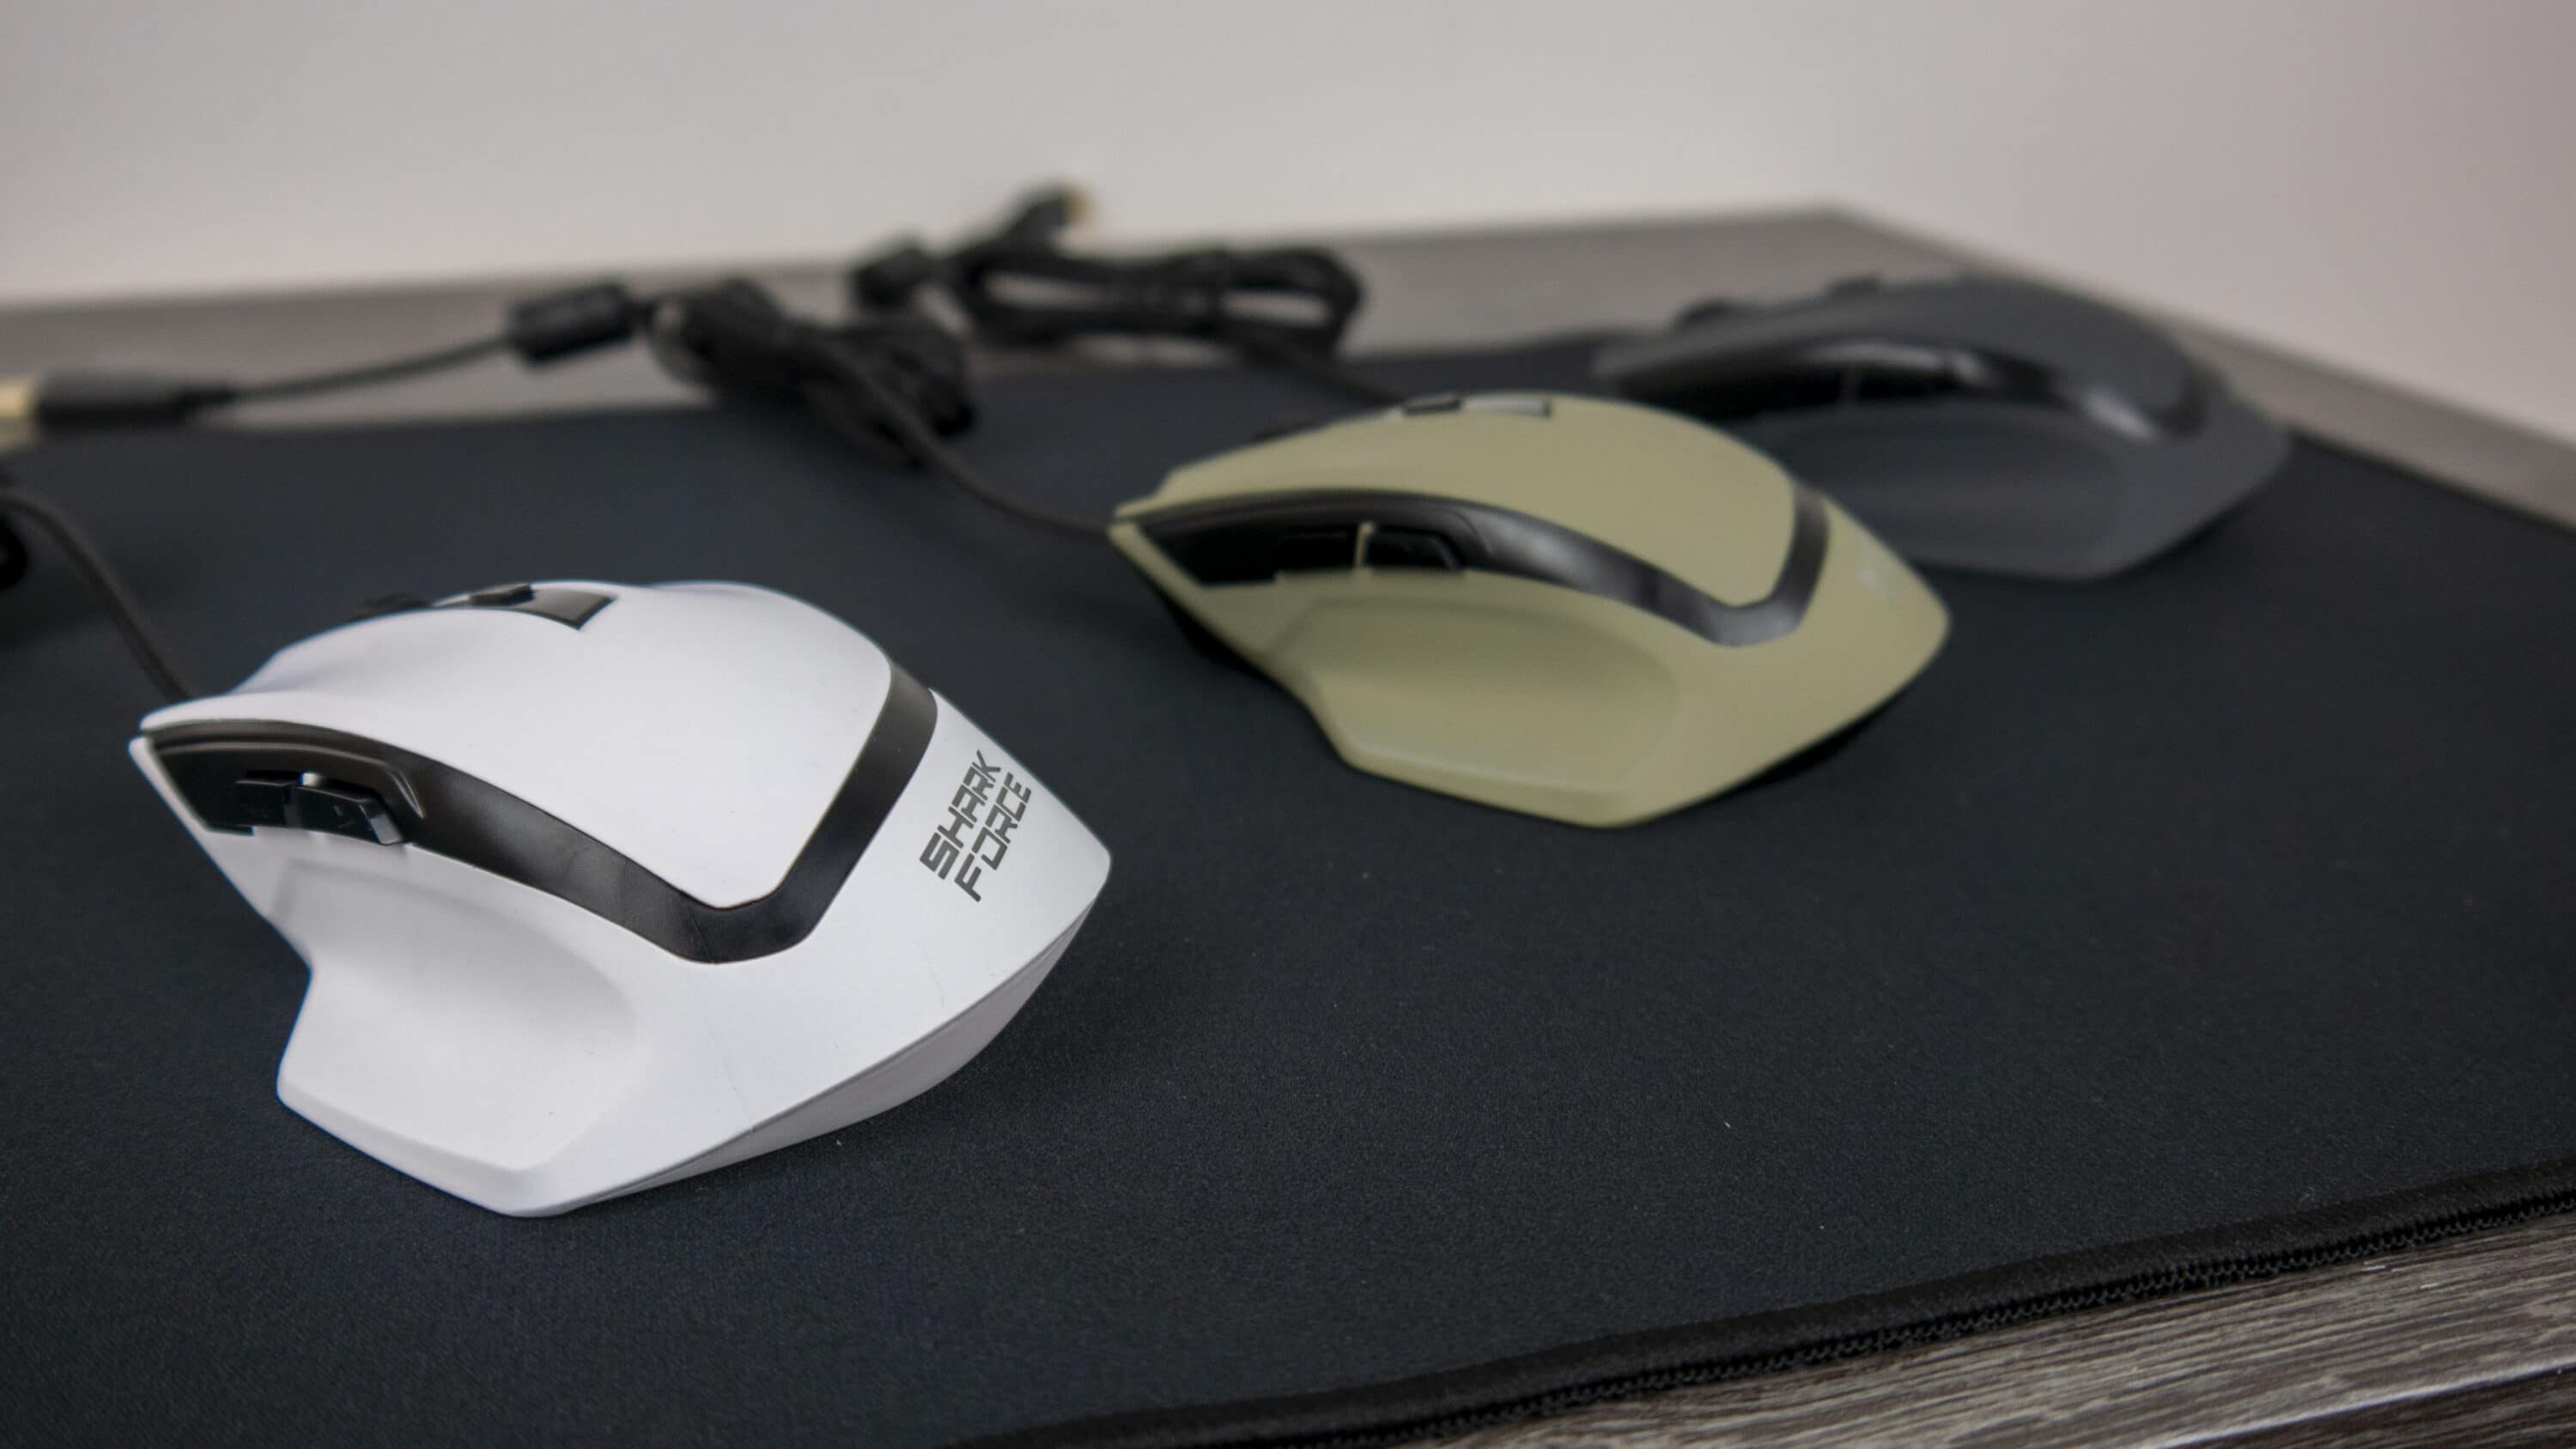 in Sharkoon low-priced? The Cheap ll test Shark or mouse gaming Force